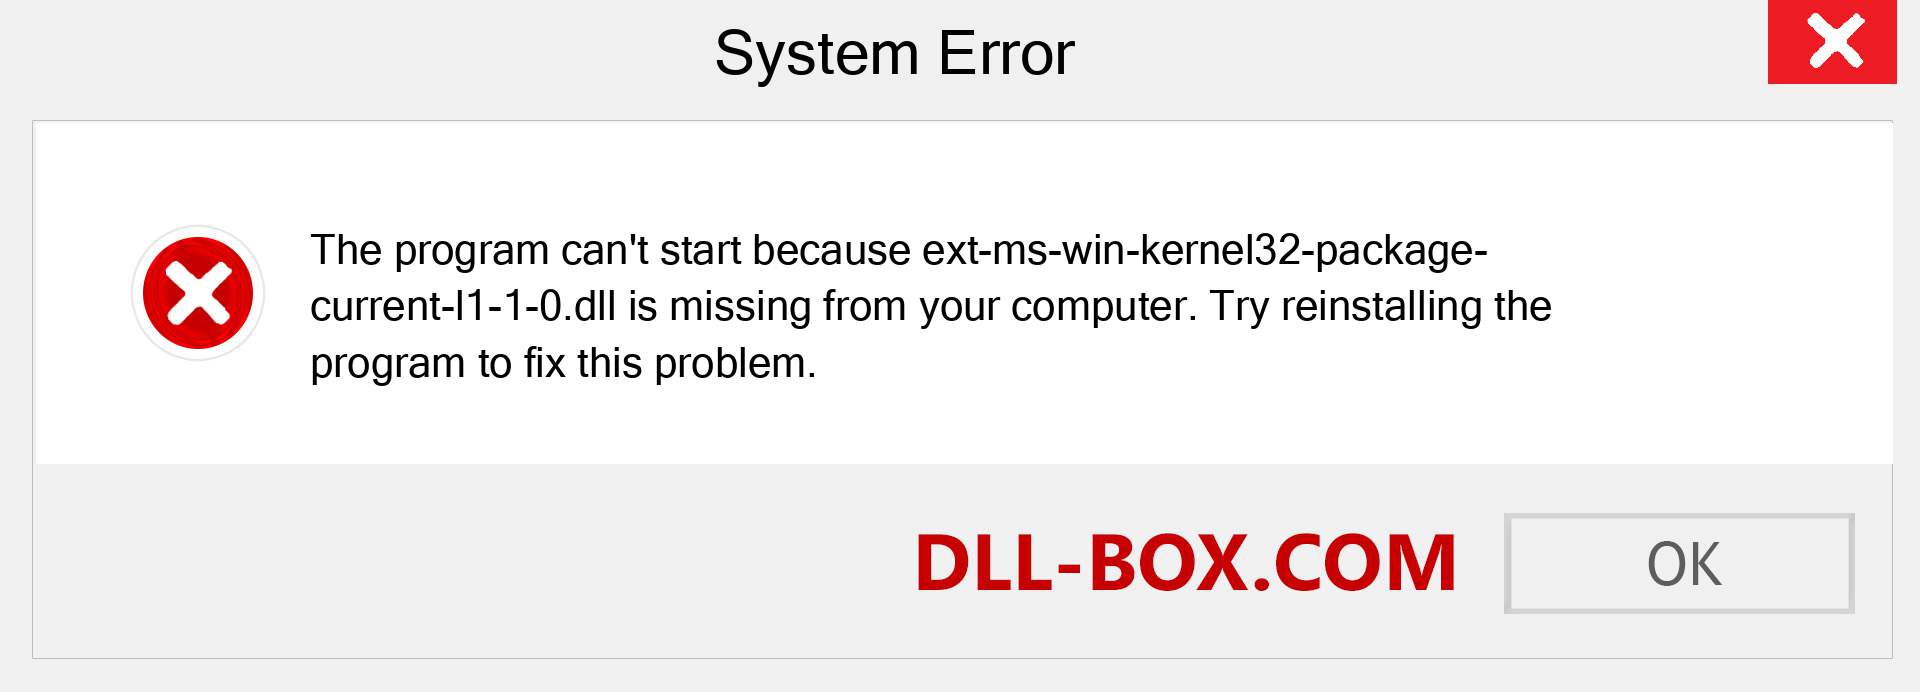  ext-ms-win-kernel32-package-current-l1-1-0.dll file is missing?. Download for Windows 7, 8, 10 - Fix  ext-ms-win-kernel32-package-current-l1-1-0 dll Missing Error on Windows, photos, images